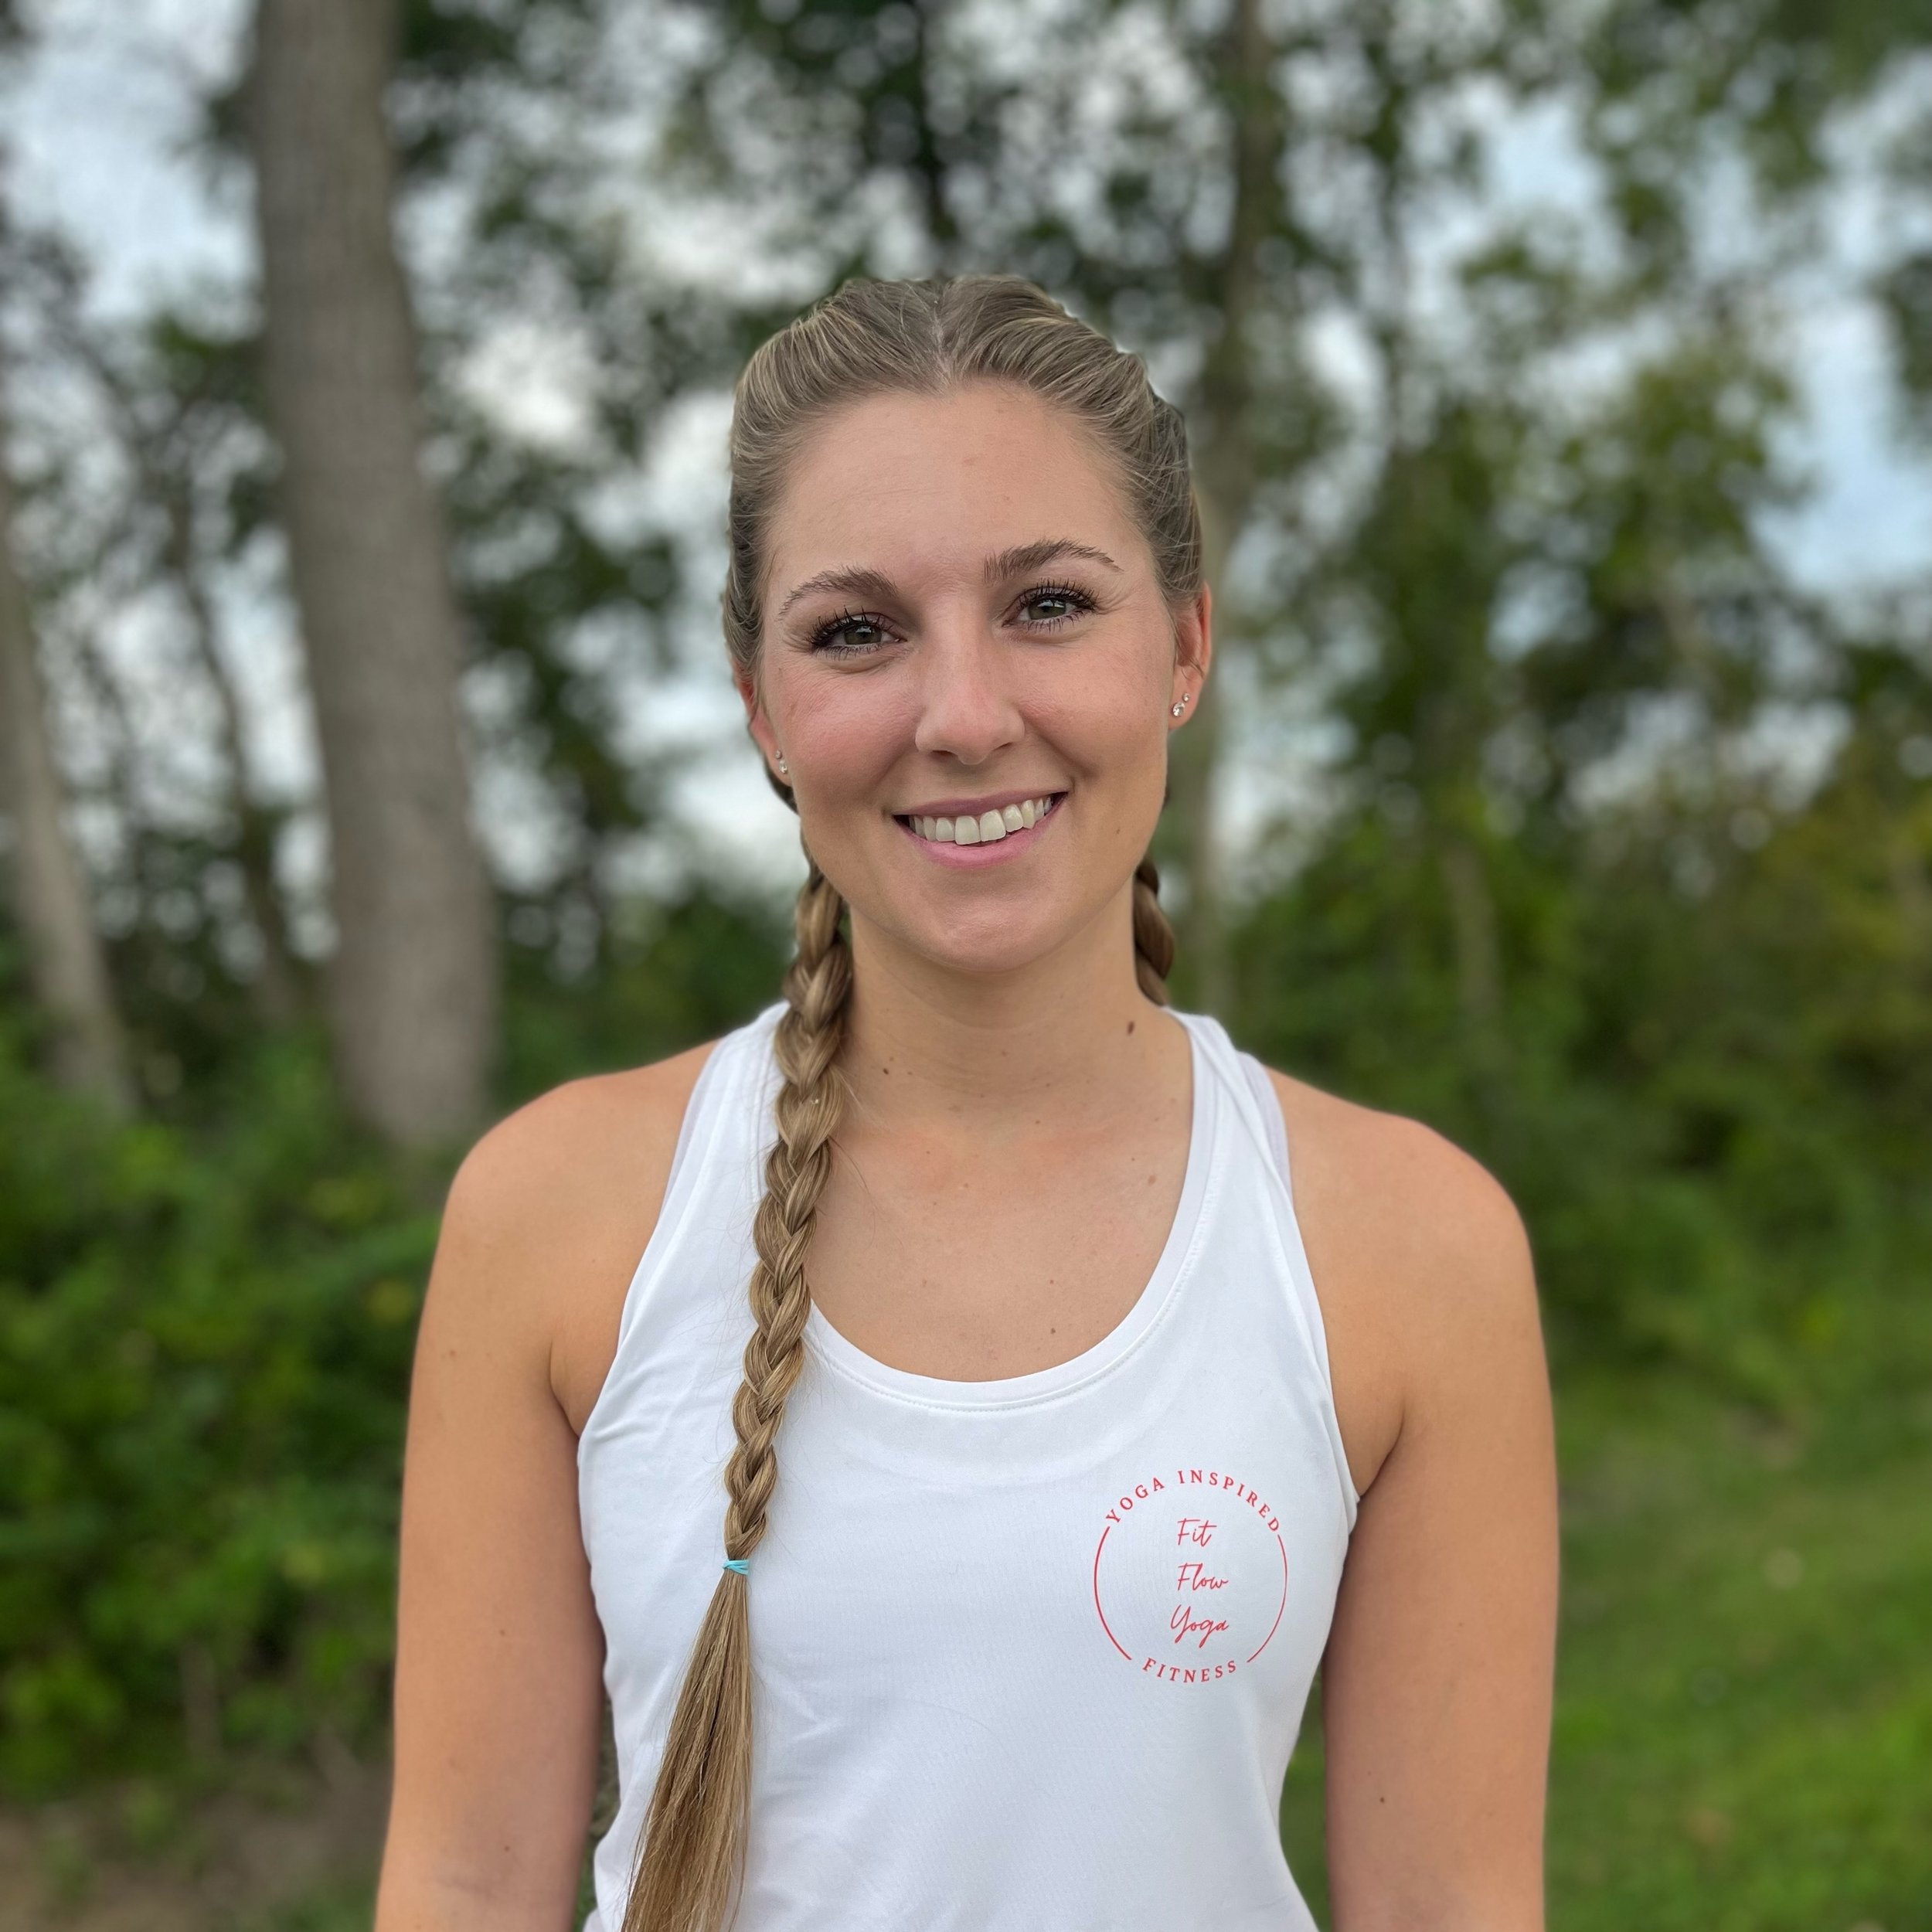 Are you a runner who is tired of feeling nagging minor pain or tightness when running? Do you feel like you have tried everything to fix the pain, but can&rsquo;t find a solution to run pain free? 

Let me help you!

I&rsquo;m Bethany B! I am a runni